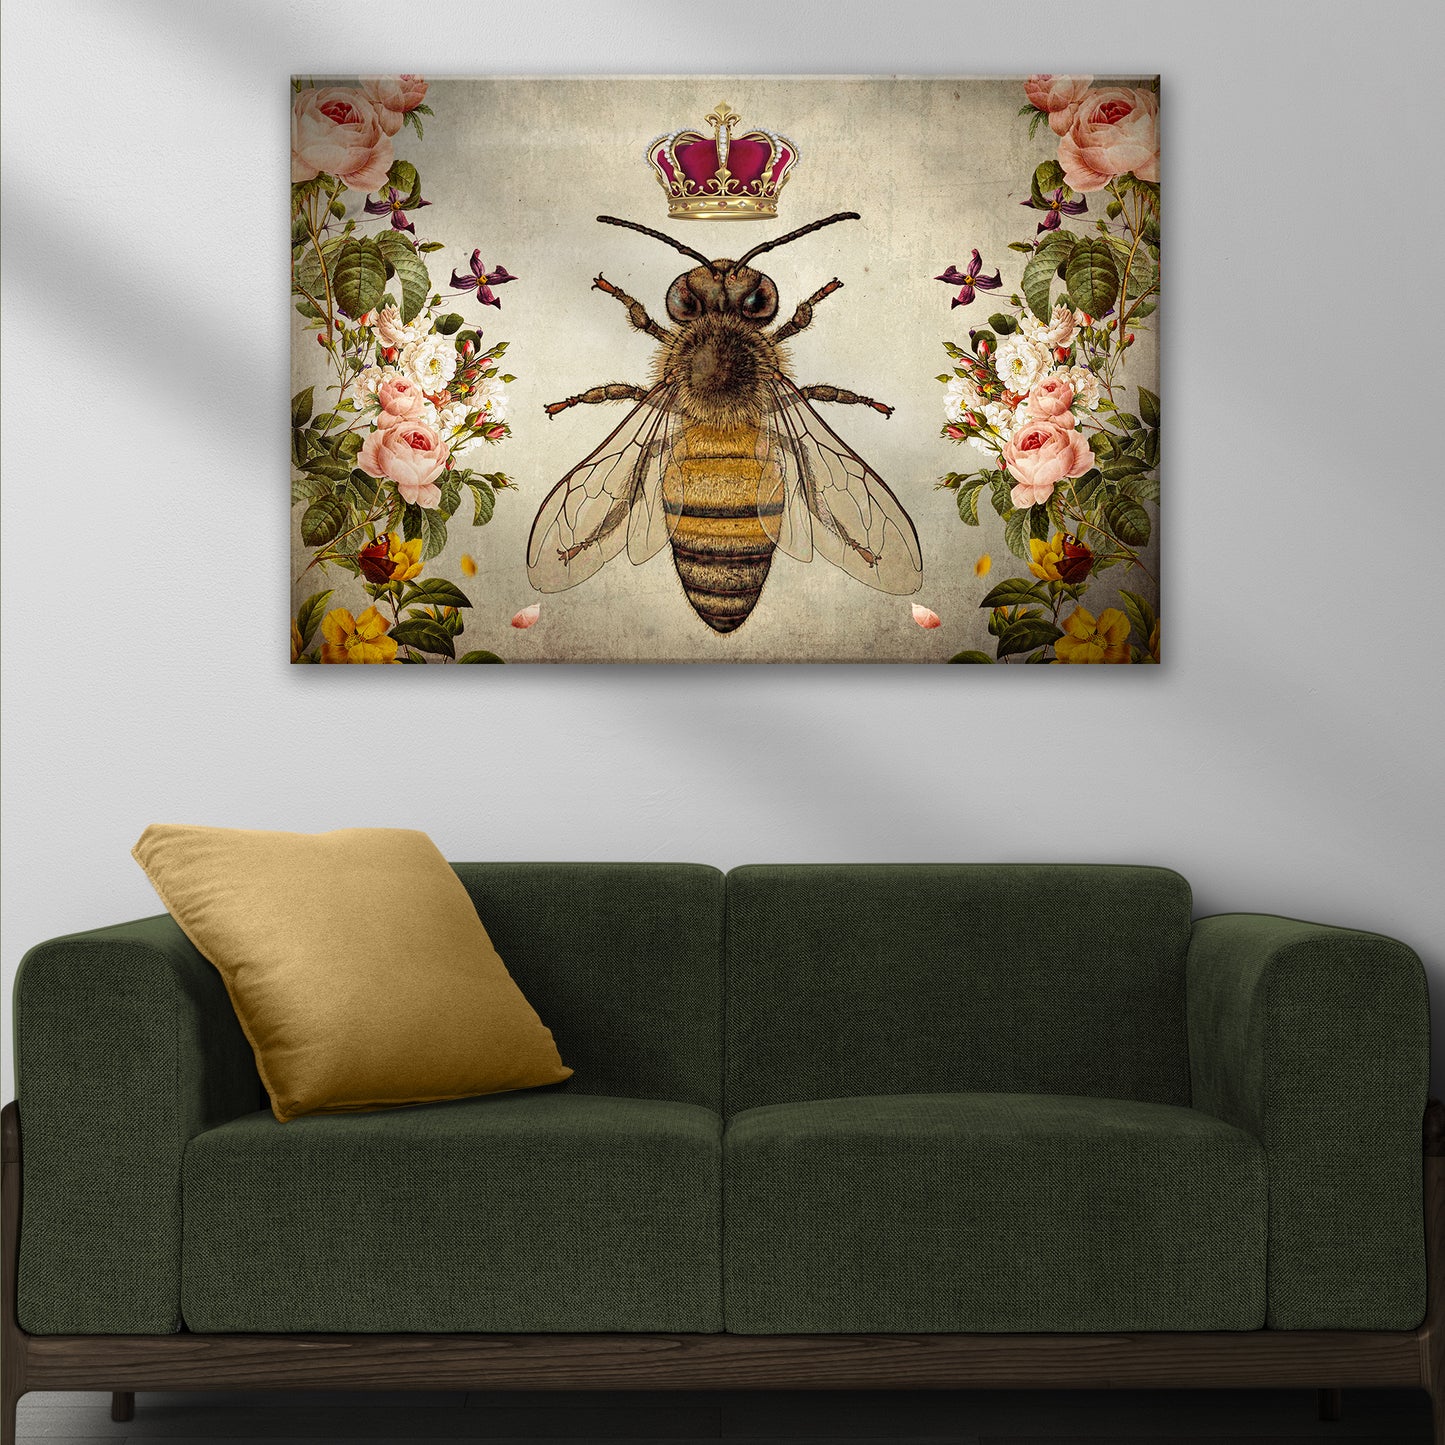 Hail Queen Bee Canvas Wall Art Style 2 - Image by Tailored Canvases